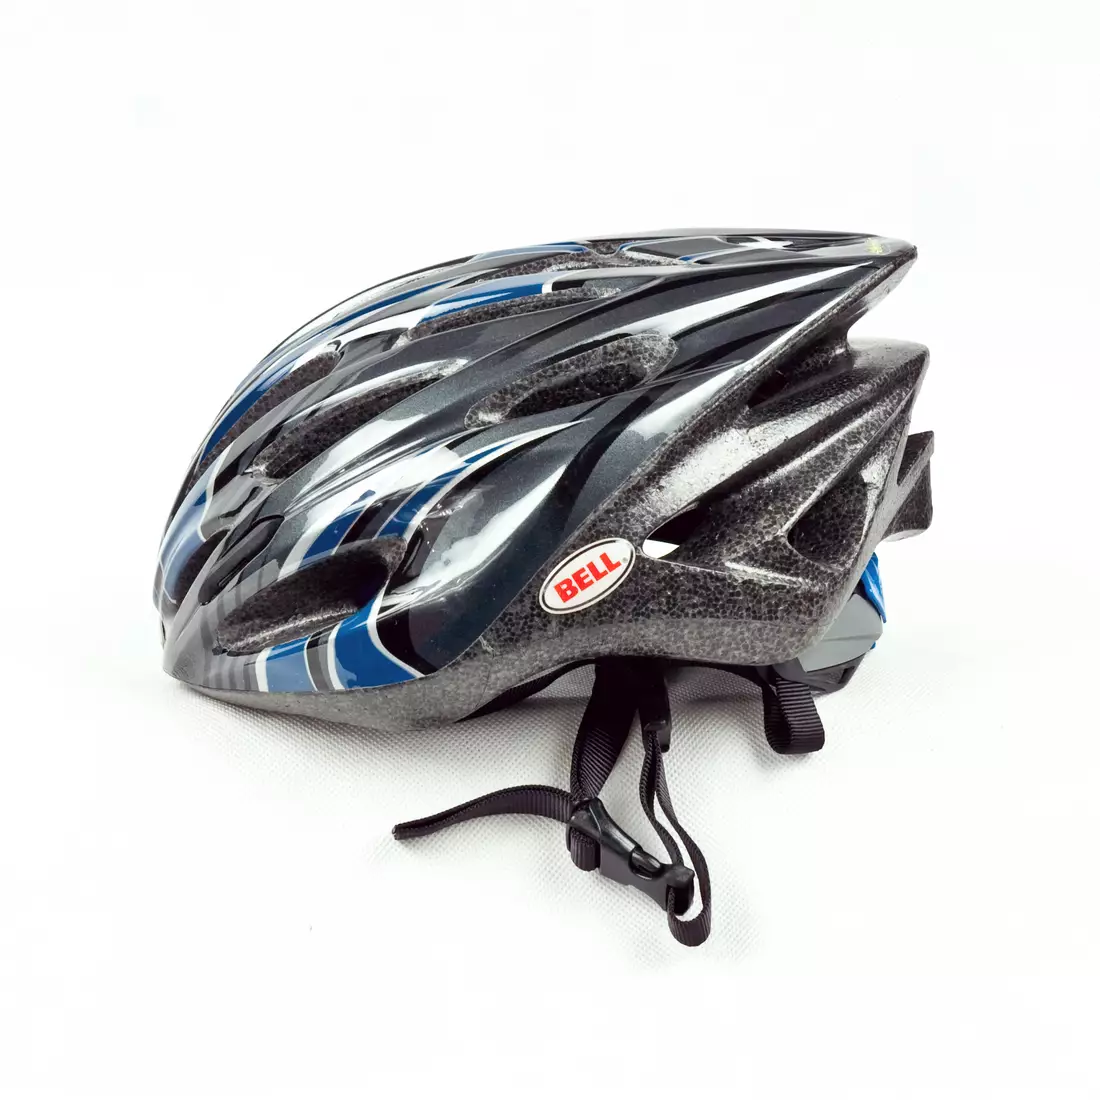 BELL SOLAR - bicycle helmet, black and blue